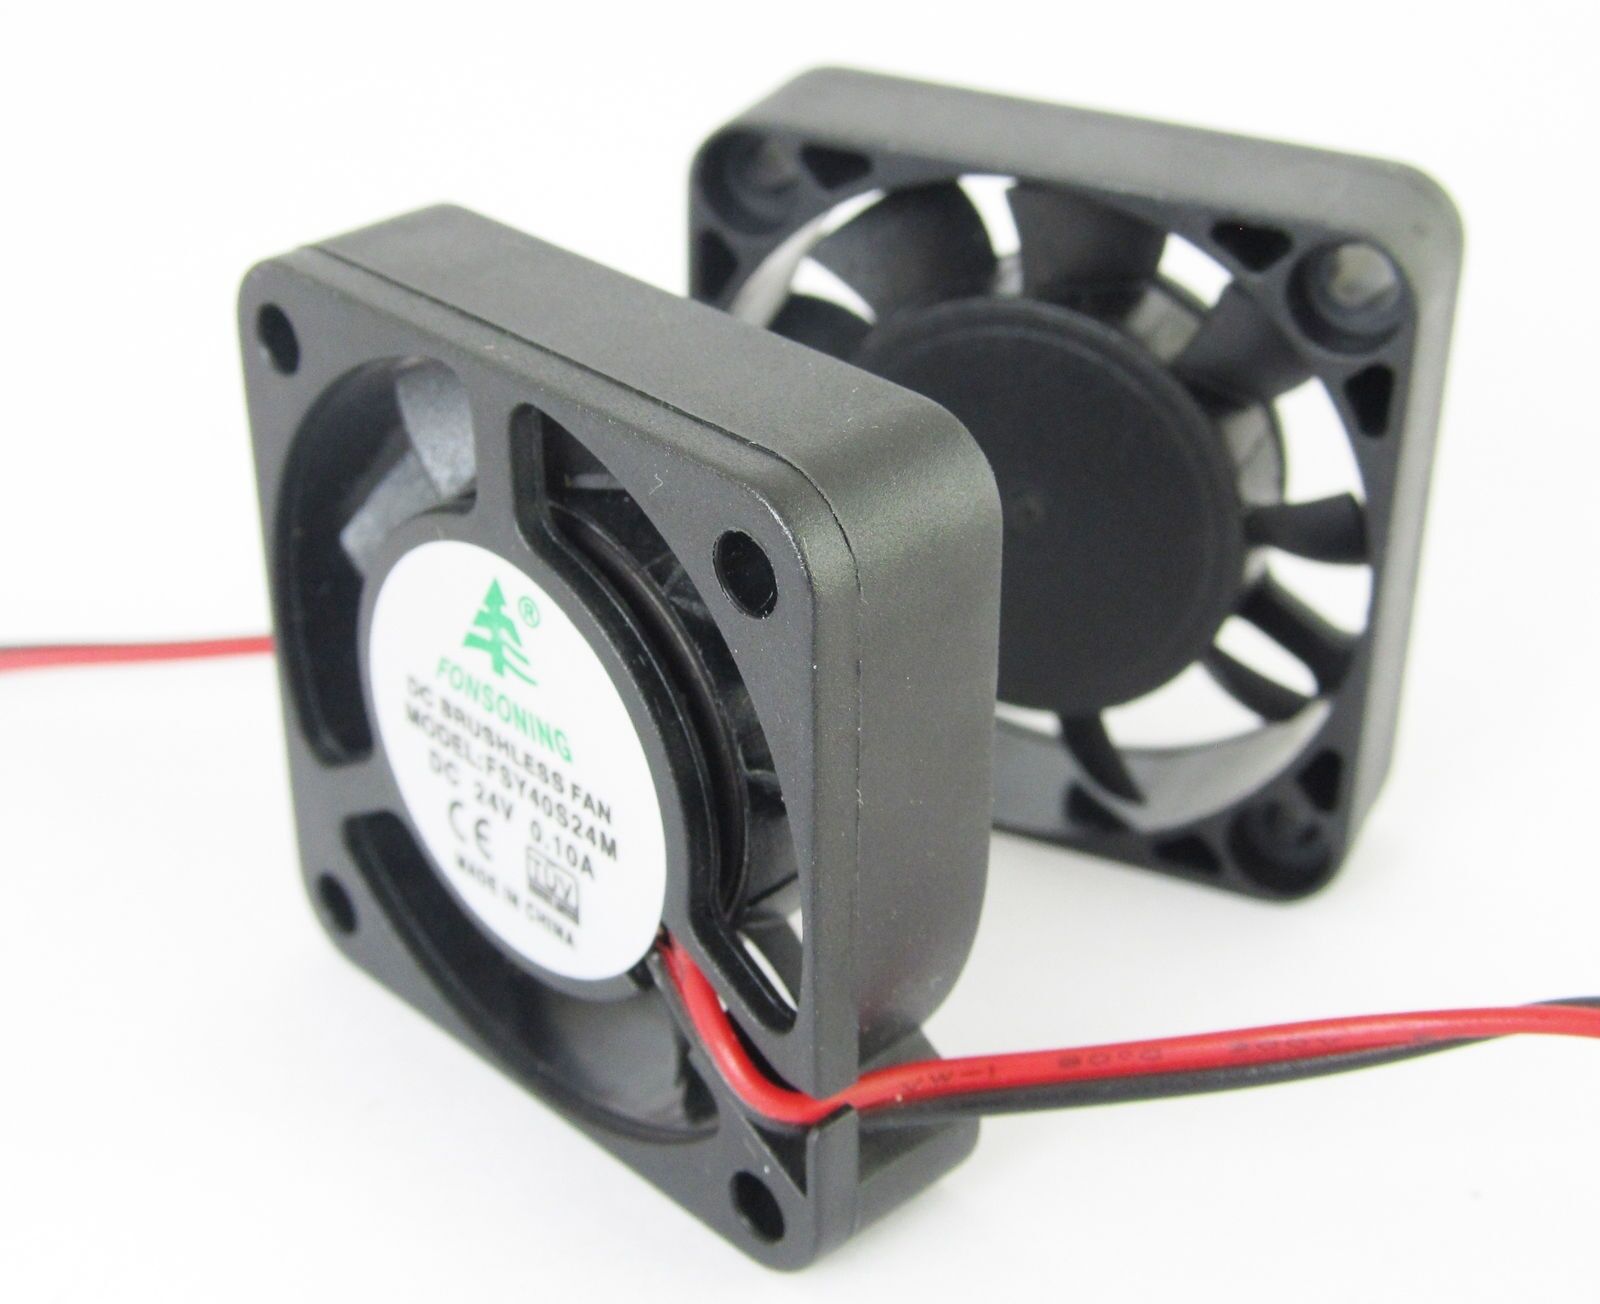 5 x DC Brushless Cooling Fan 40x40x10mm 4010 9 blades 24V 0.1A 2pin  Connector